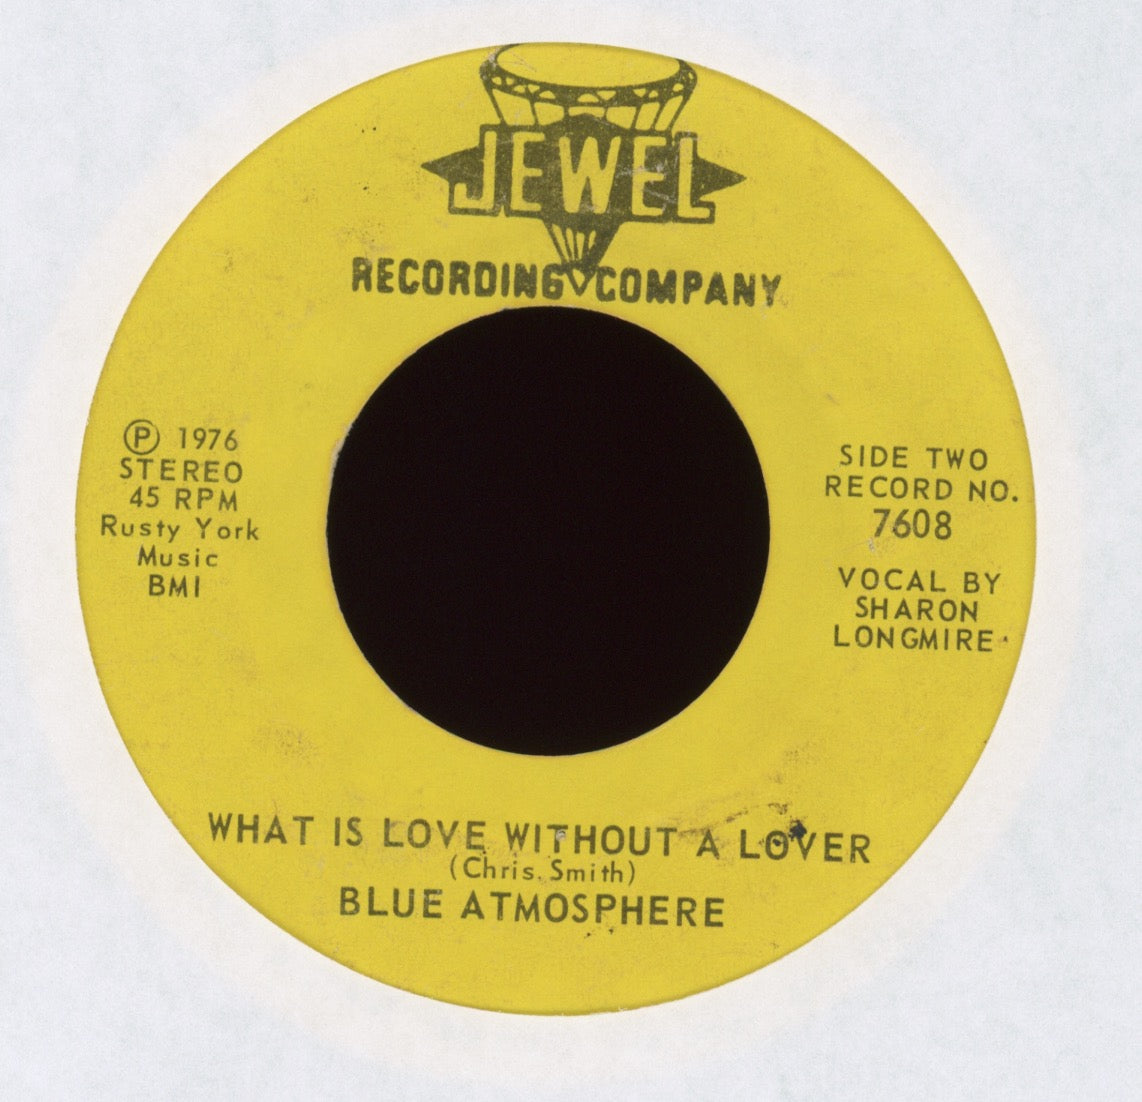 Blue Atmosphere - Blue Disco (Instr.) / What Is Love Without A Lover on Jewel